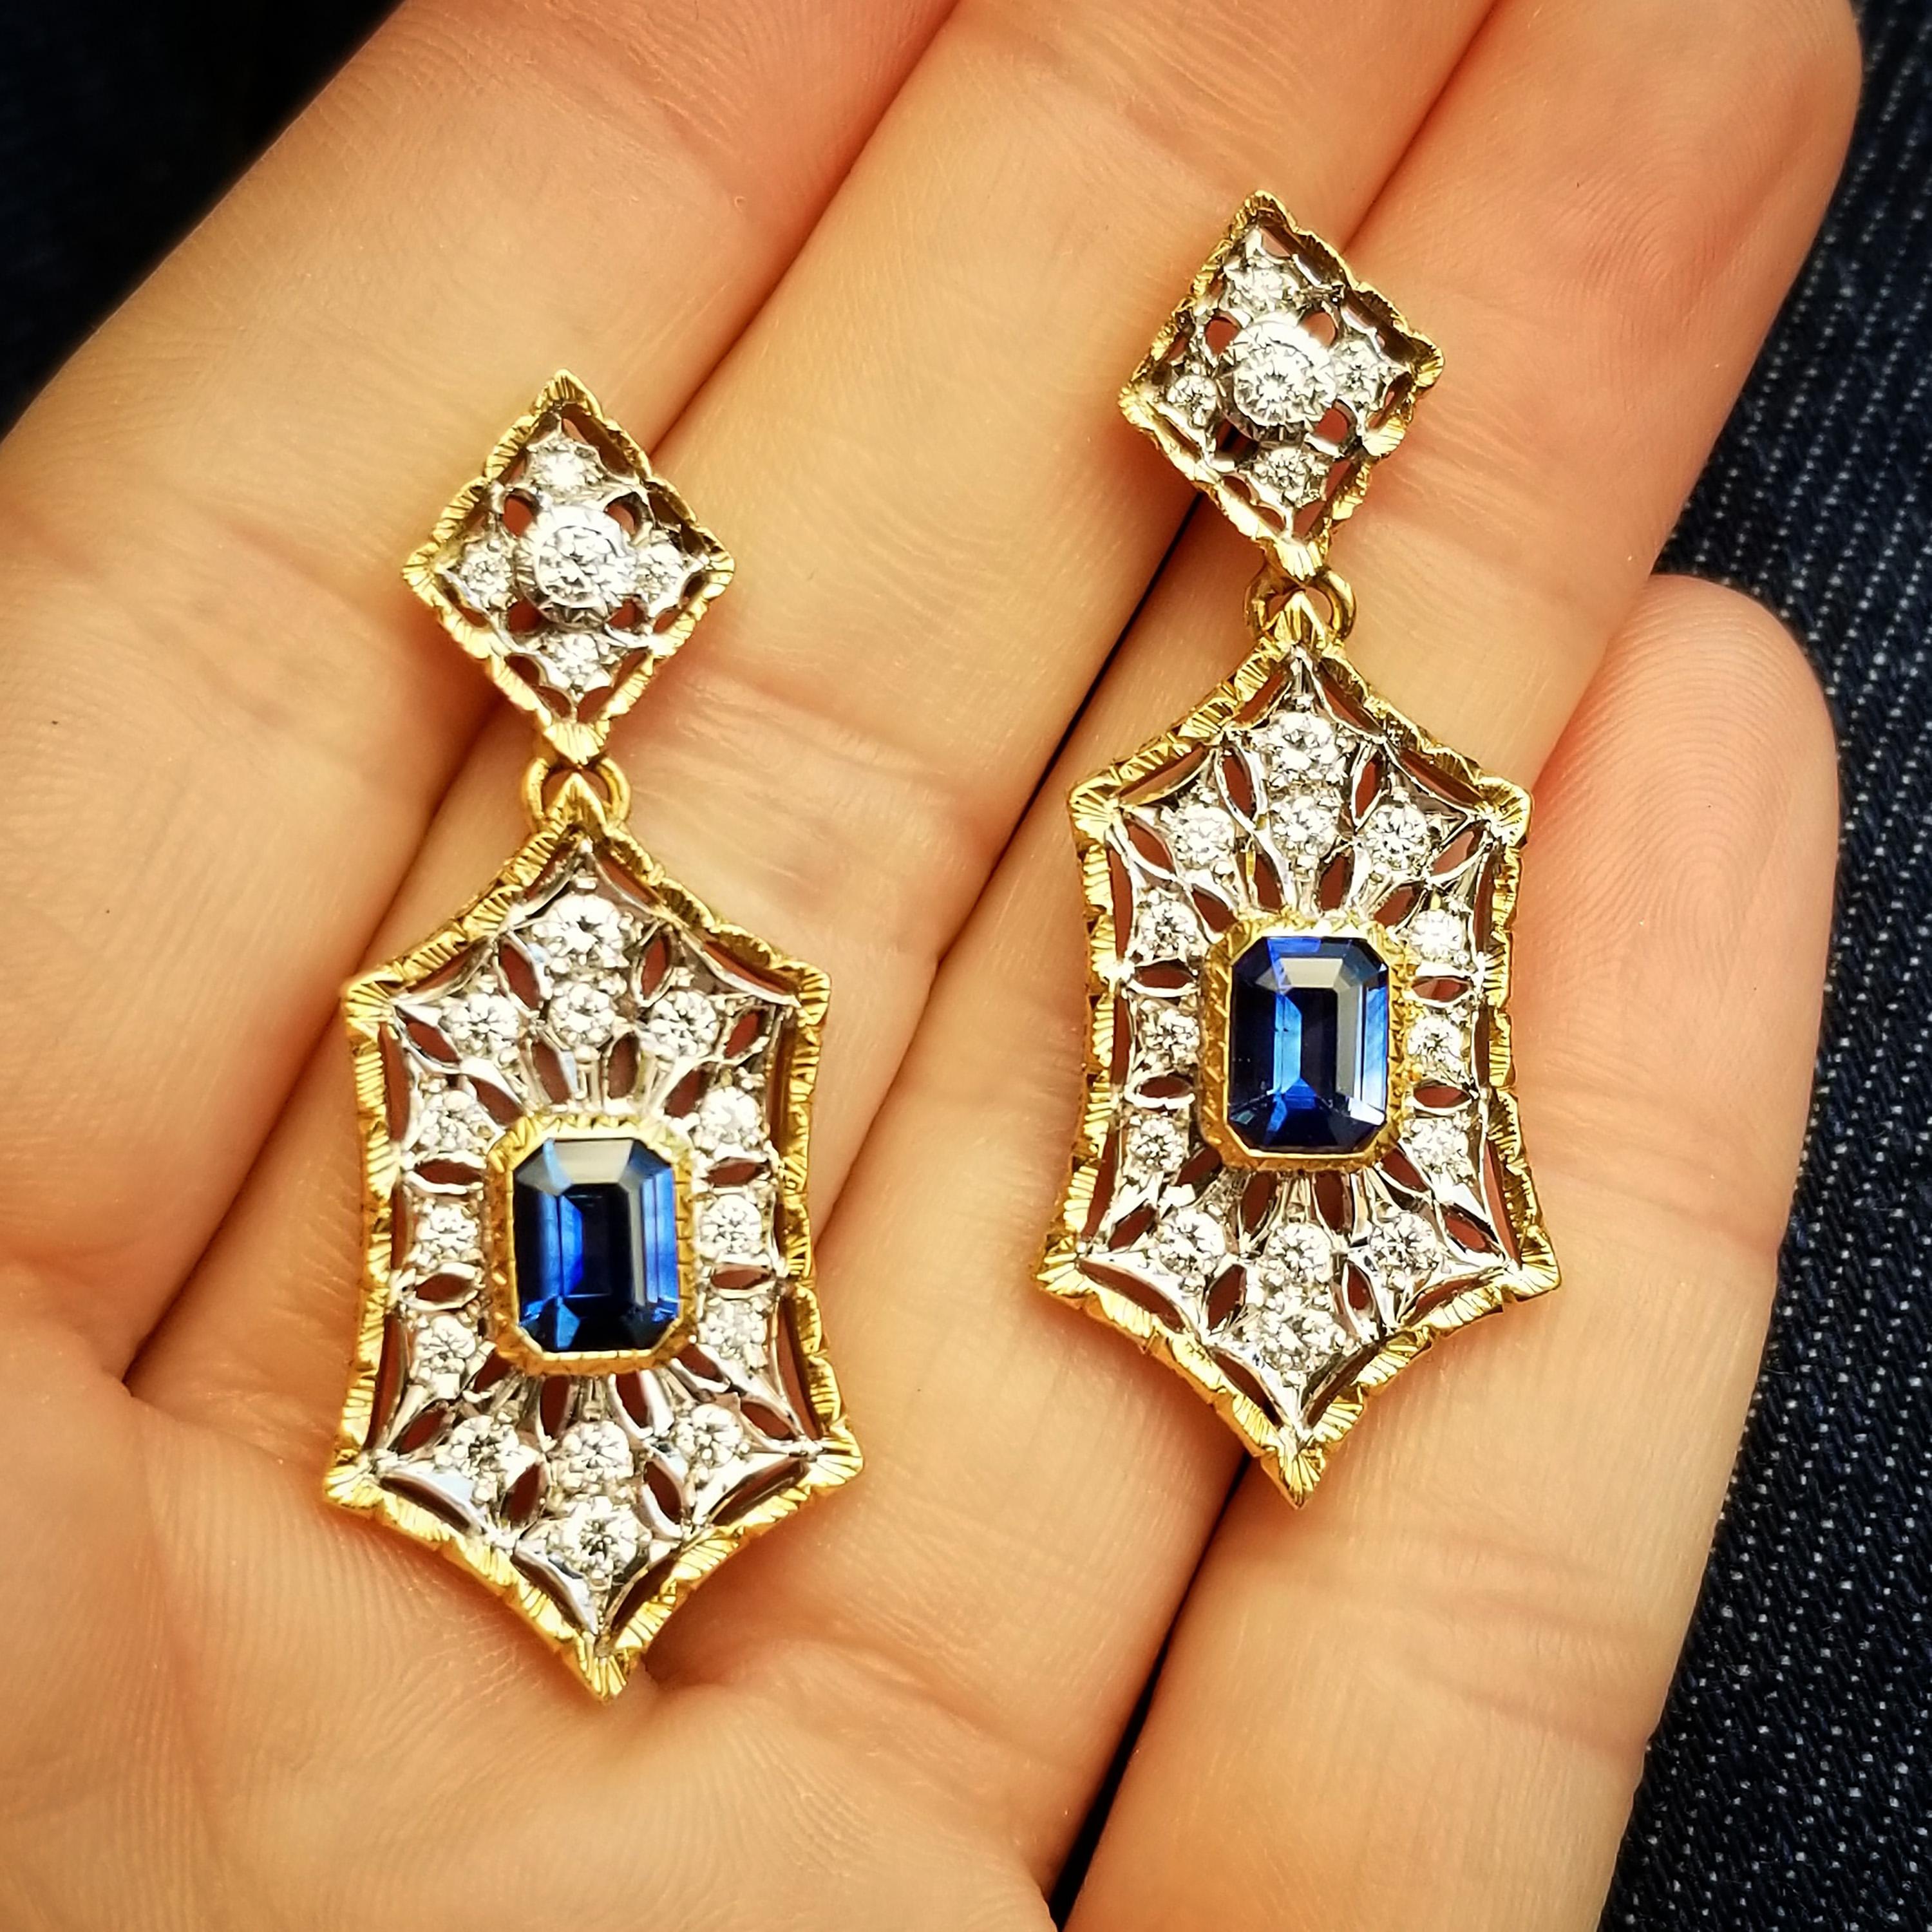 Women's 1.84ct Ceylon Sapphire and Diamond 18kt Earrings, Made in Italy by Cynthia Scott For Sale